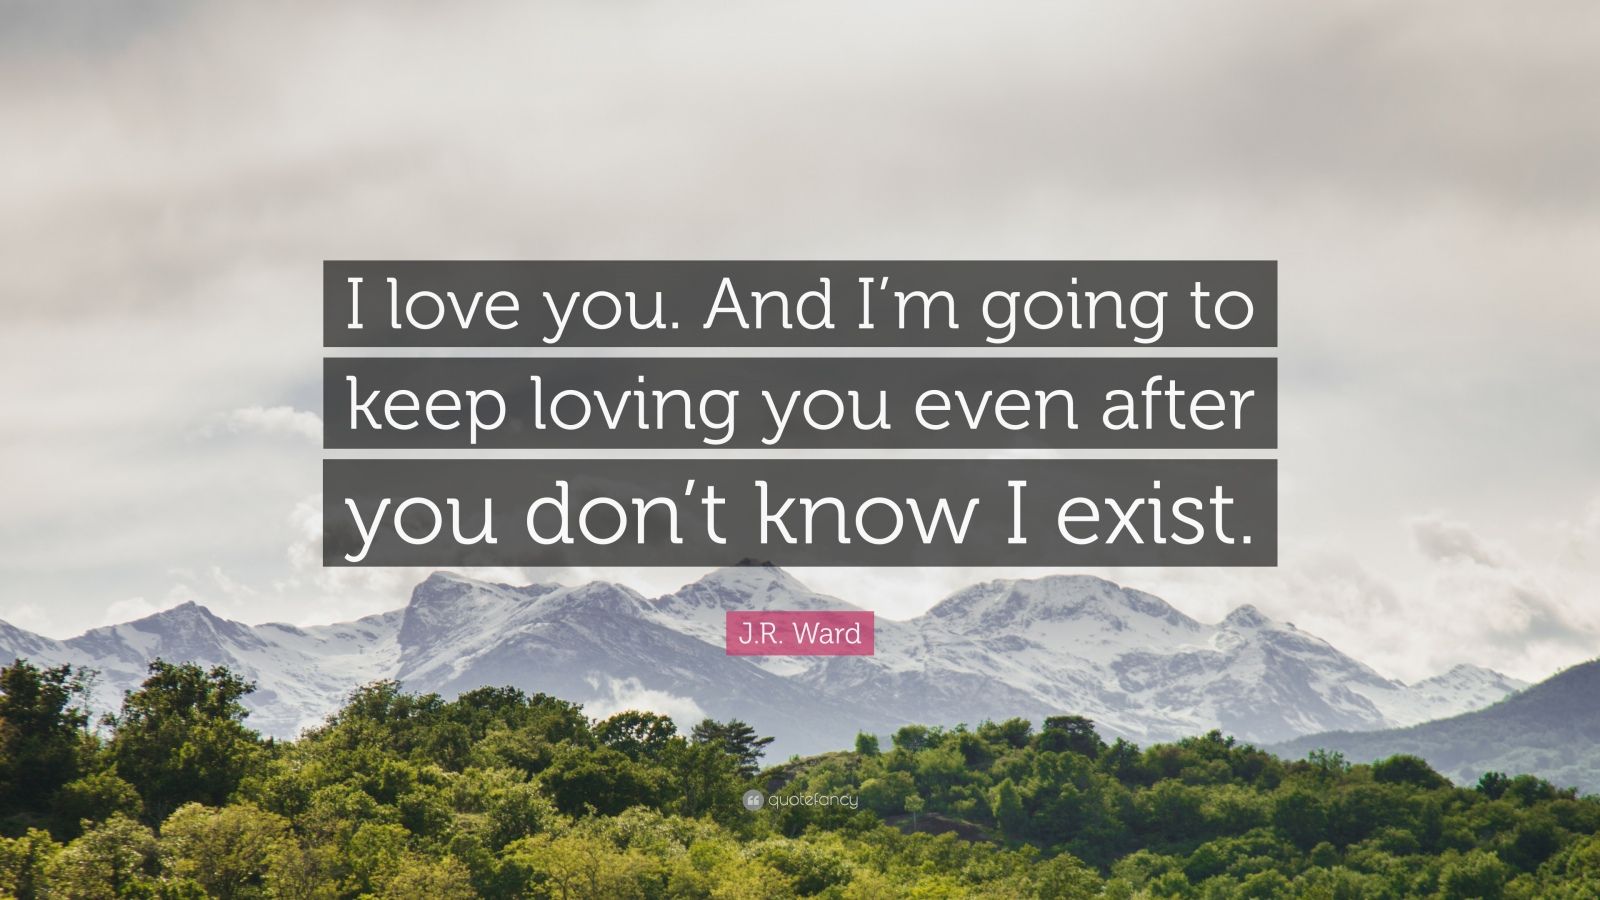 J R Ward Quote I Love You And I M Going To Keep Loving You Even After You Don T Know I Exist